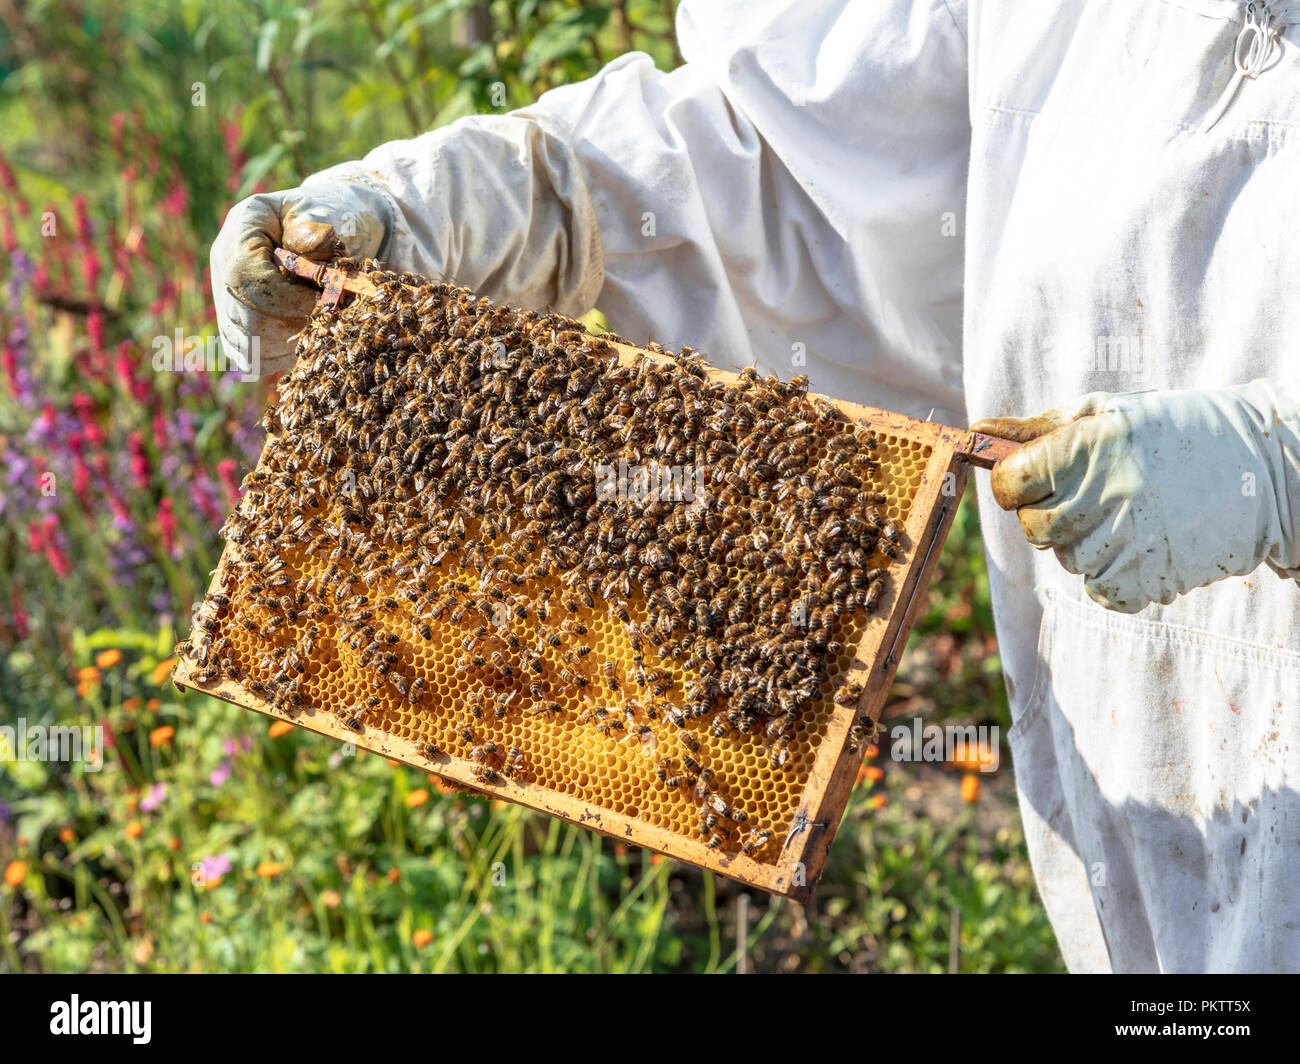 Beekeeper holding up a frame of honeycomb with working bees. Stock Photo